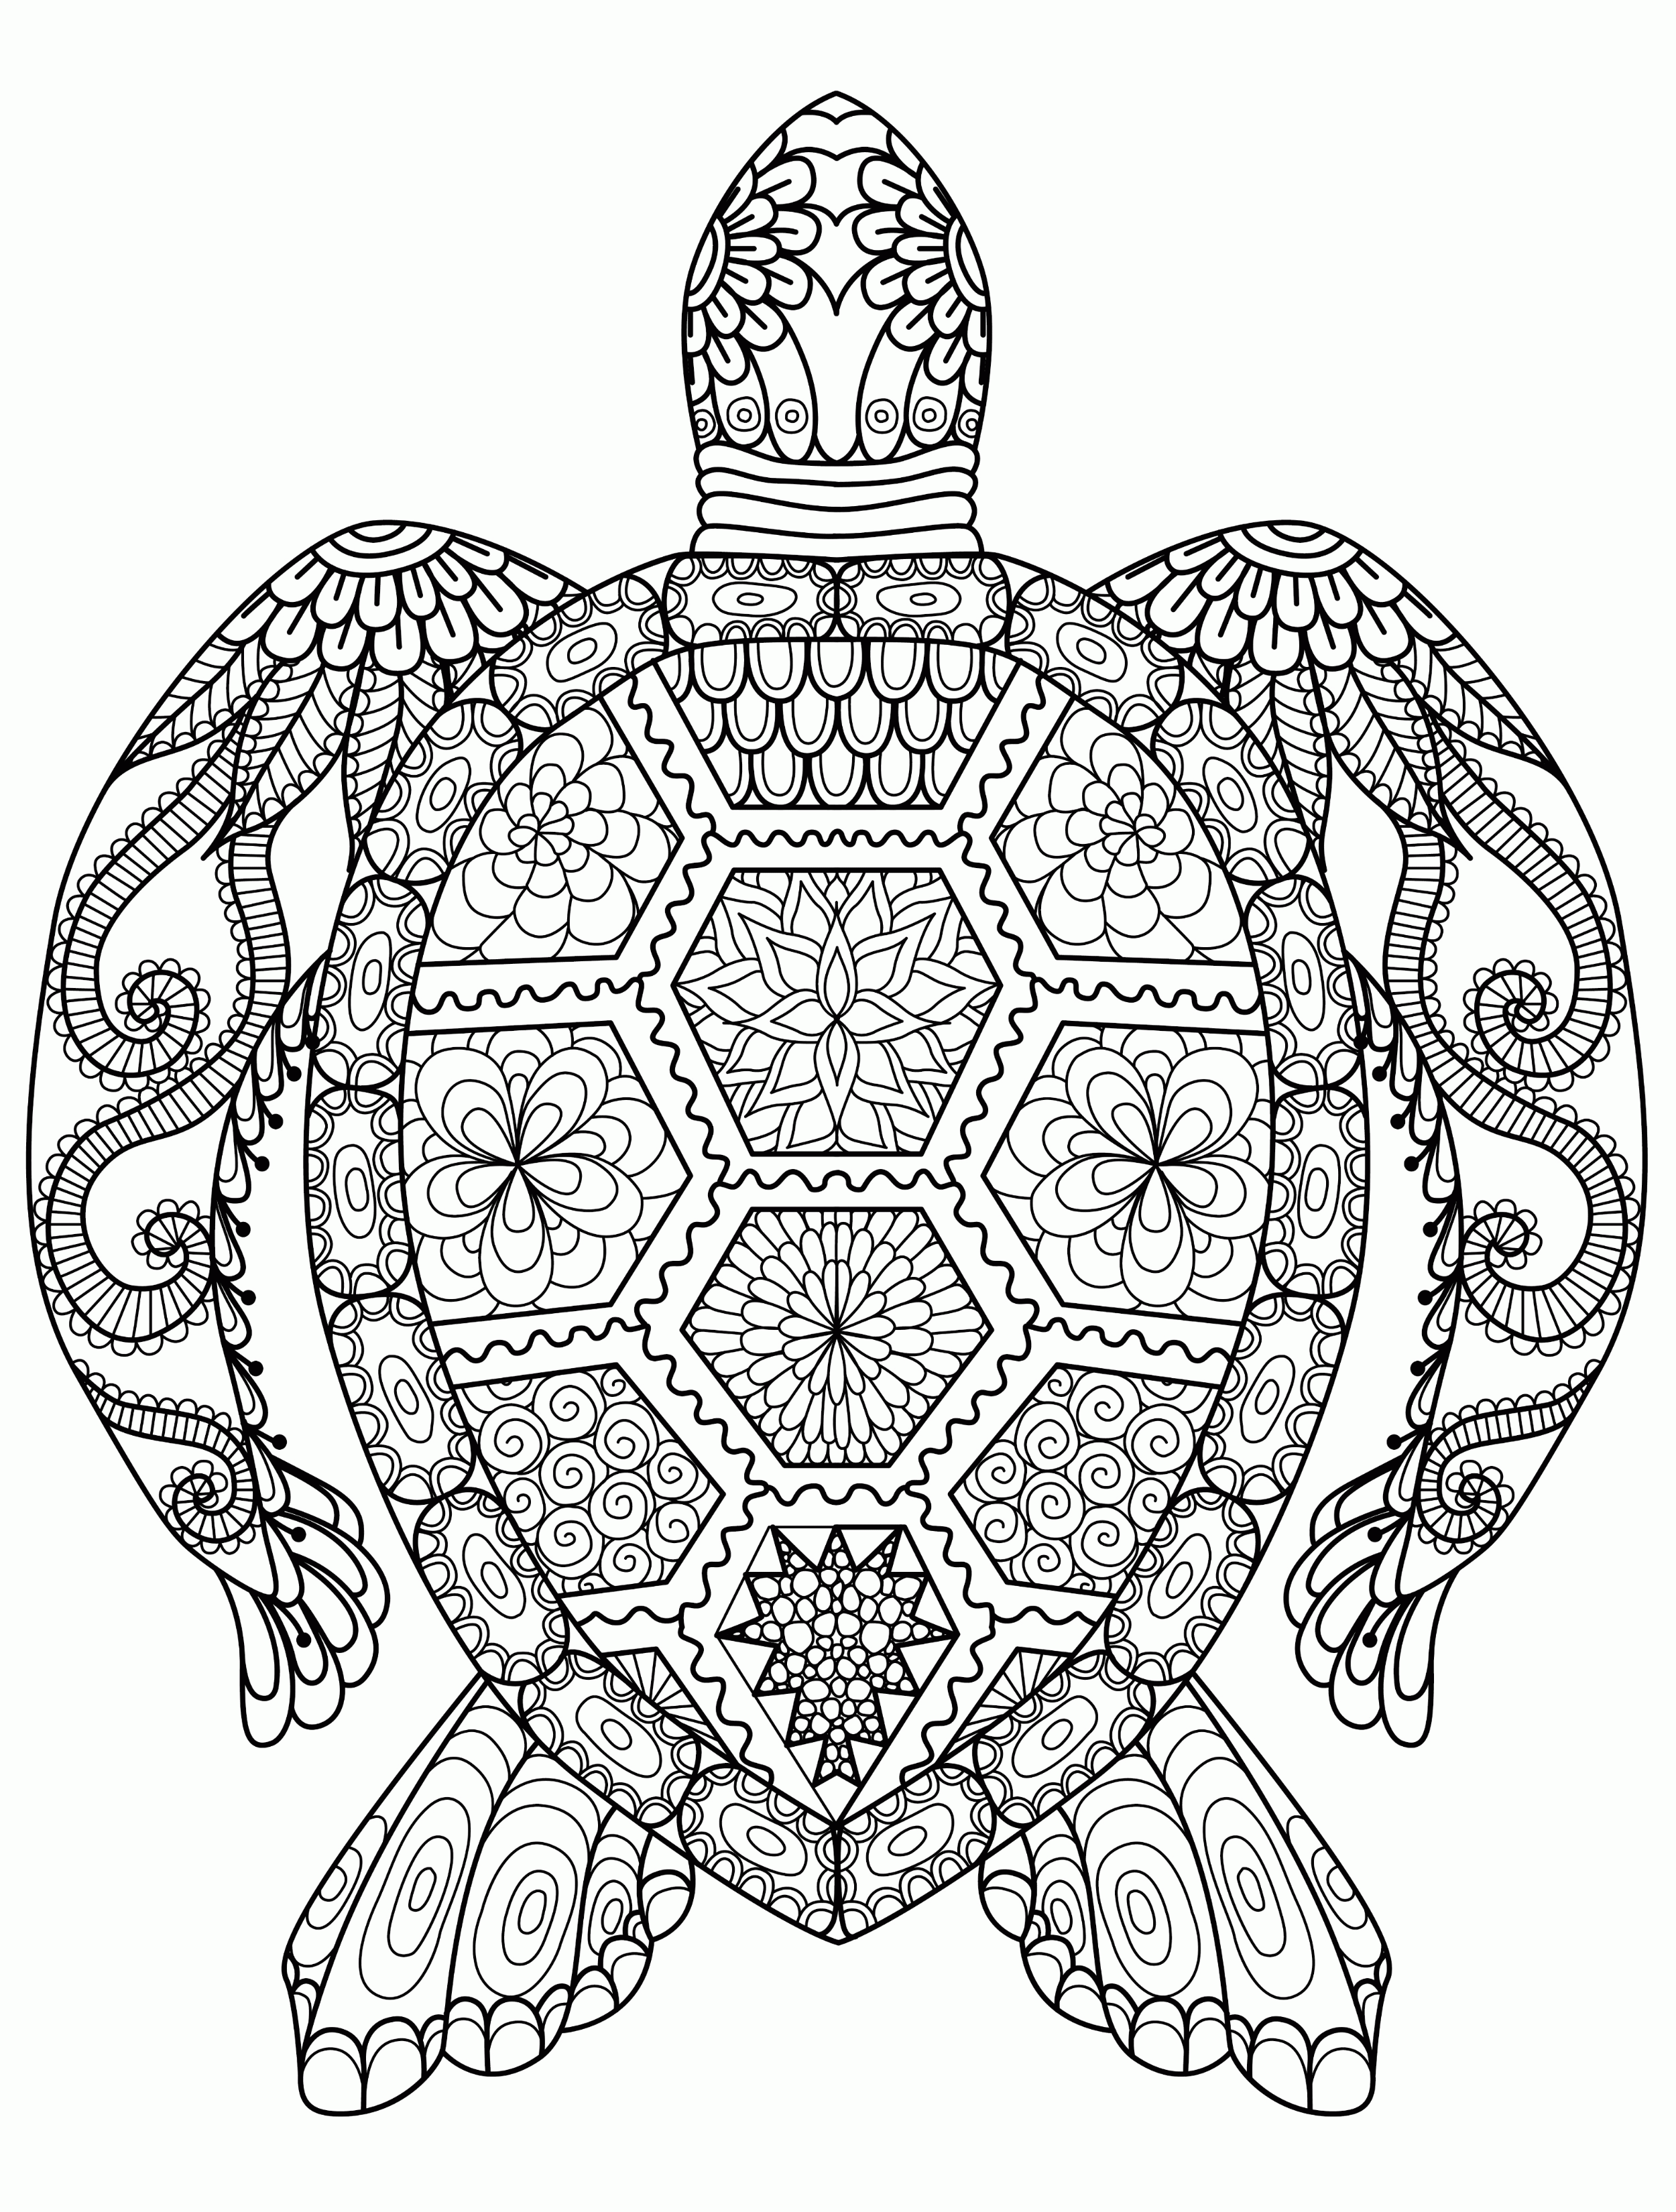 Coloring pages for adults - Free artwork